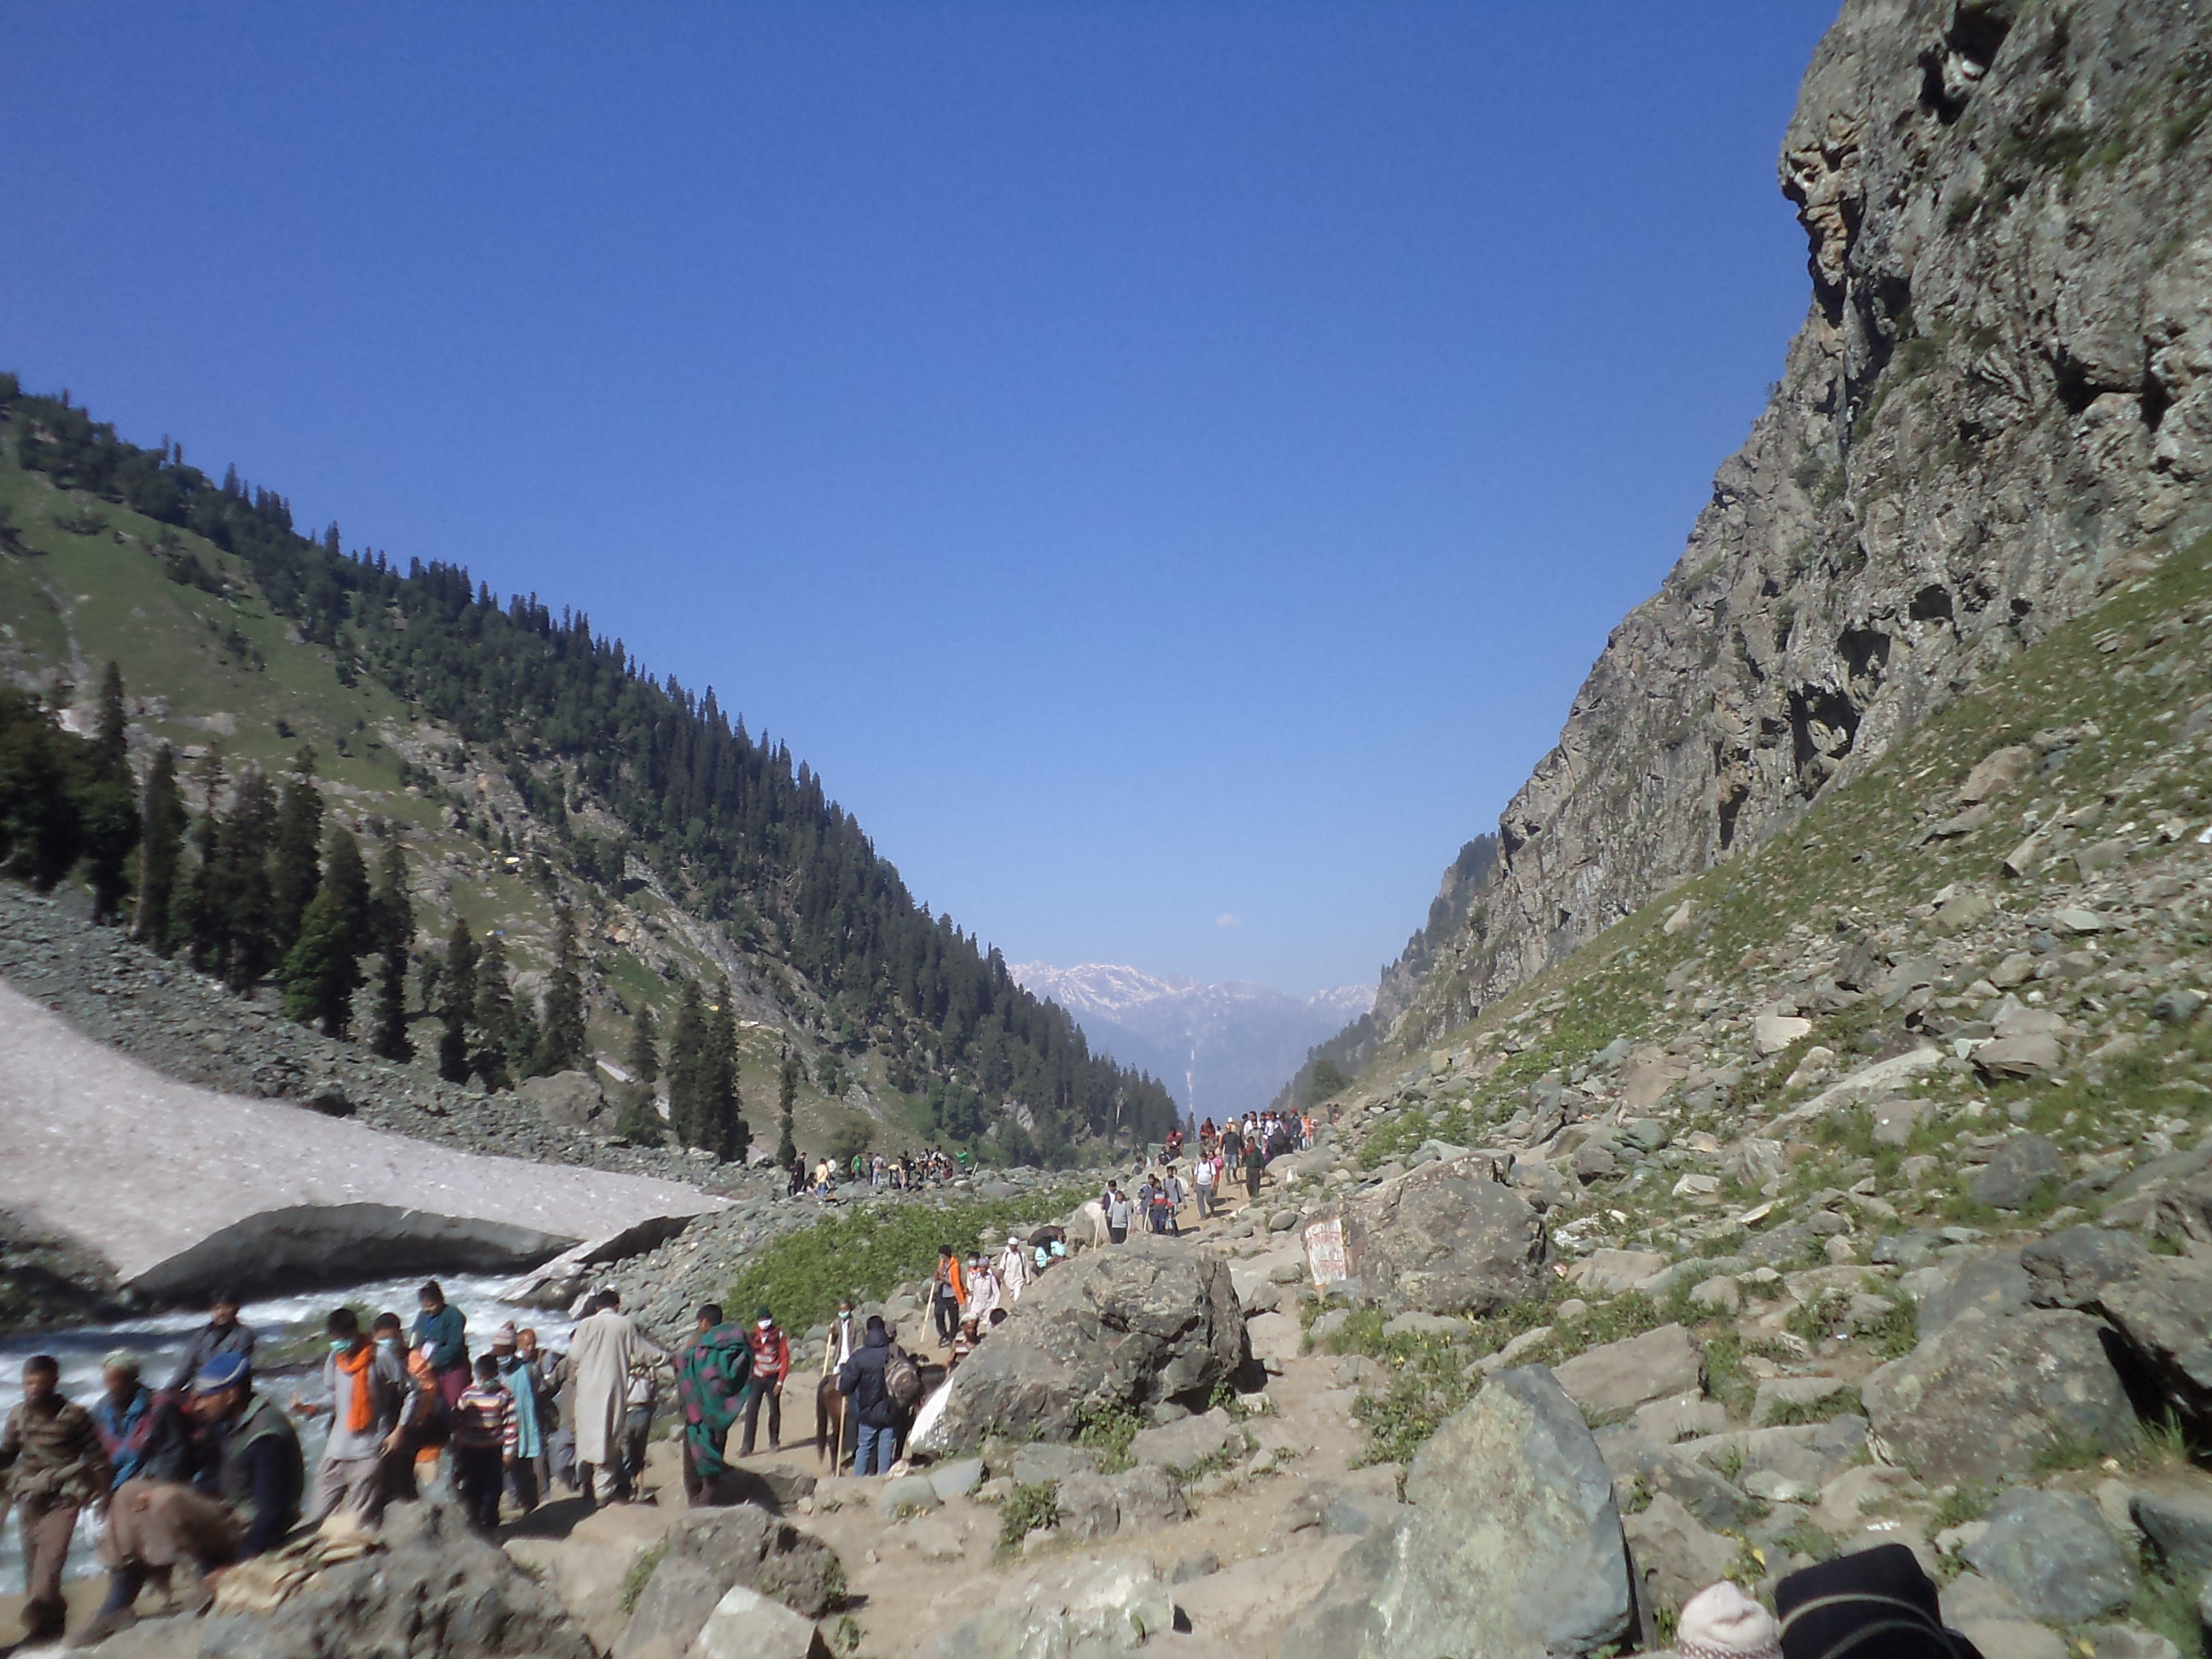 Amarnath Yatra: J-K admin expects 6 lakh footfall, issues directions to ensure safe, smooth movement